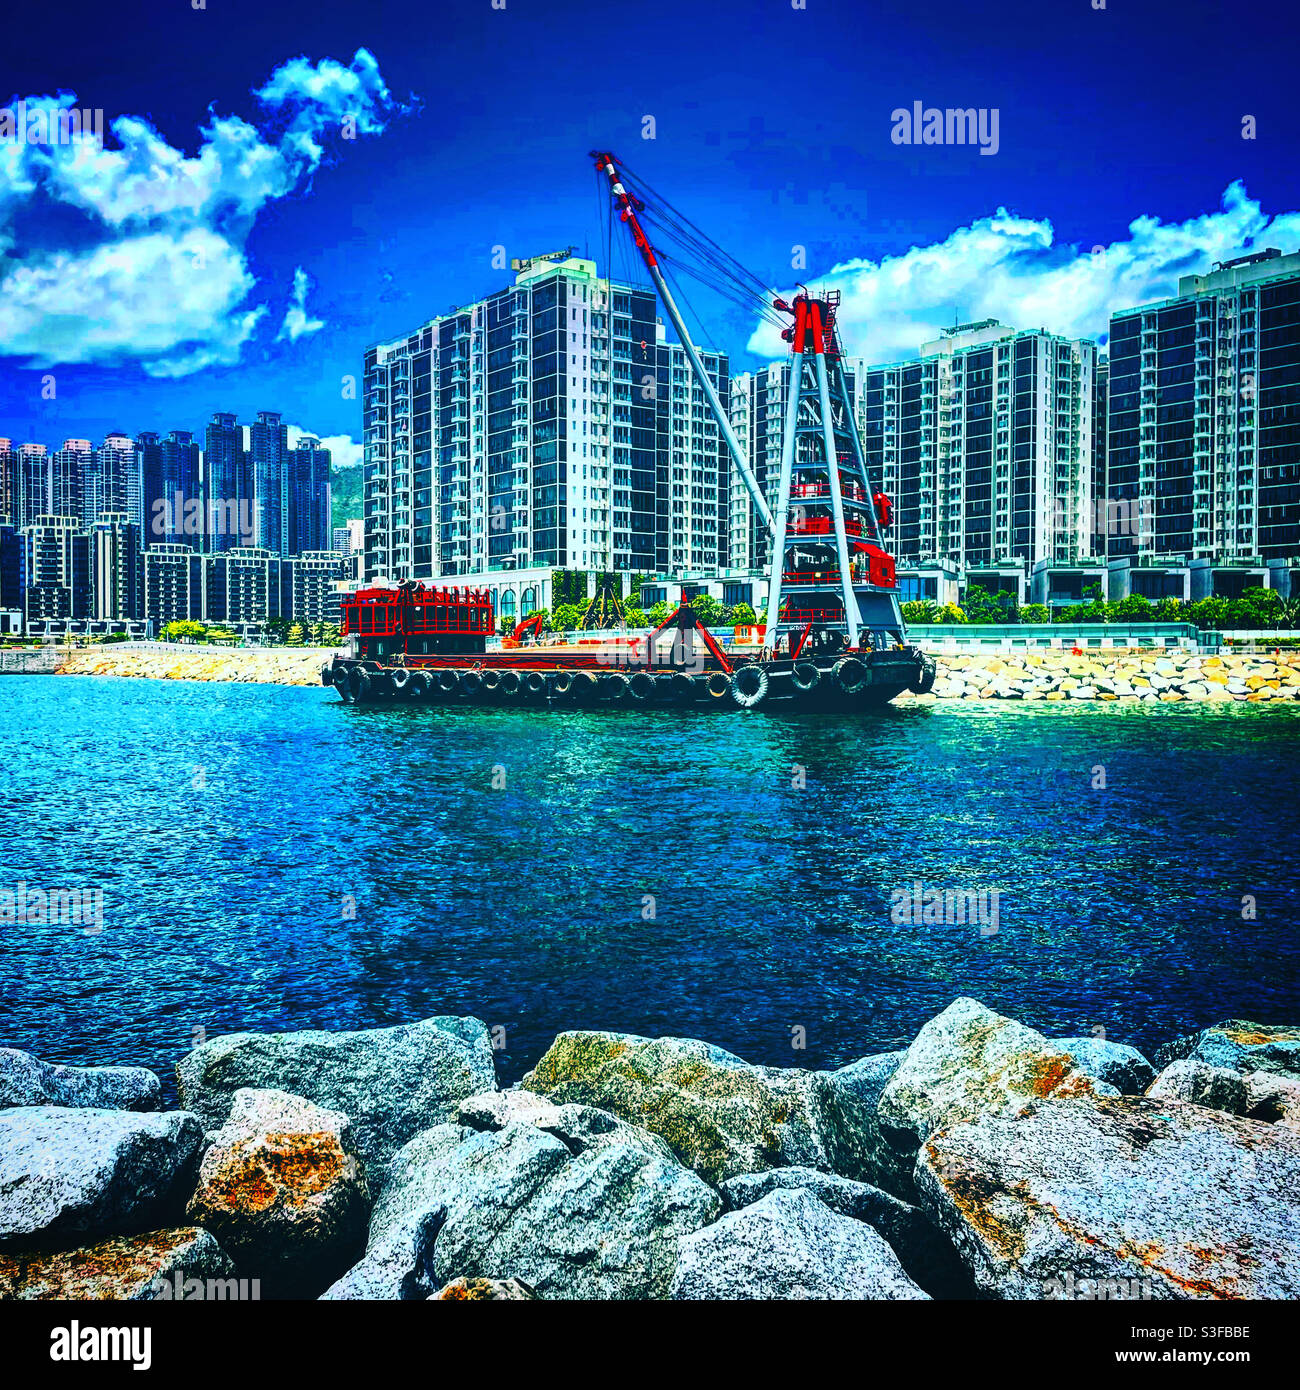 Crane on a boat near a construction dite in hong kong. We can see towers and condominiums Stock Photo